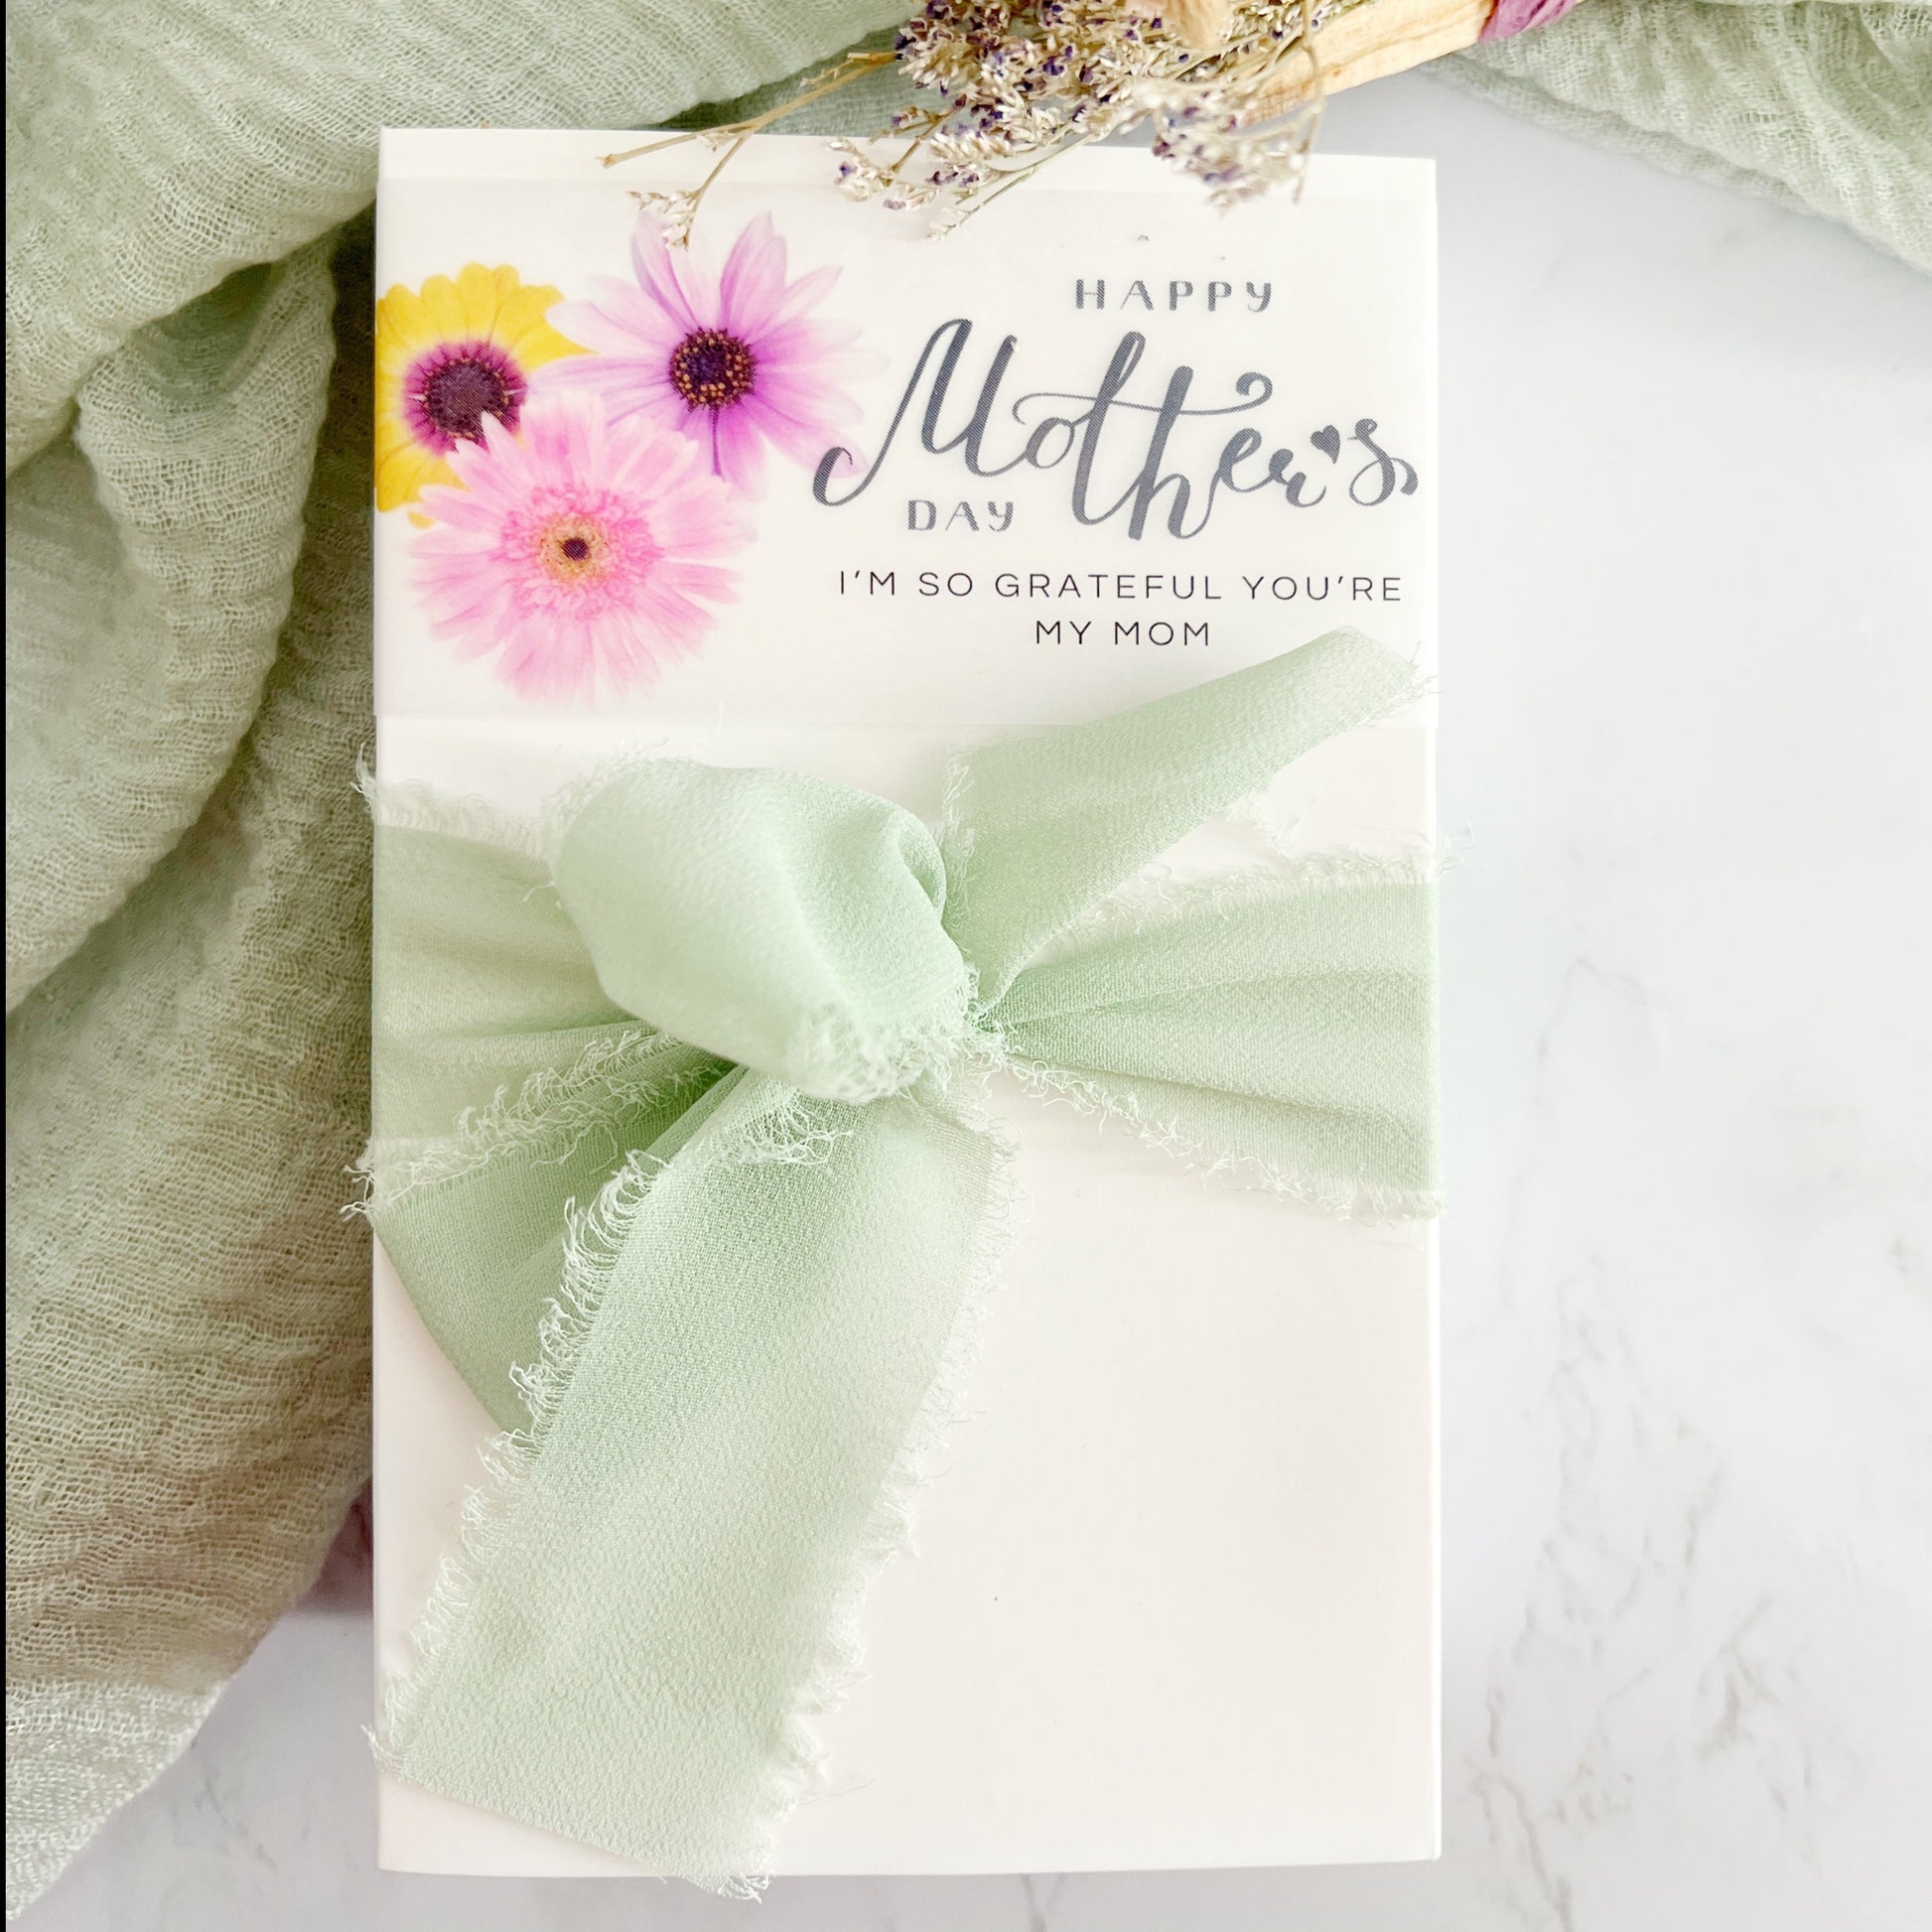 "Grateful for Mom" Mother's Day gift set from Lather and Soul